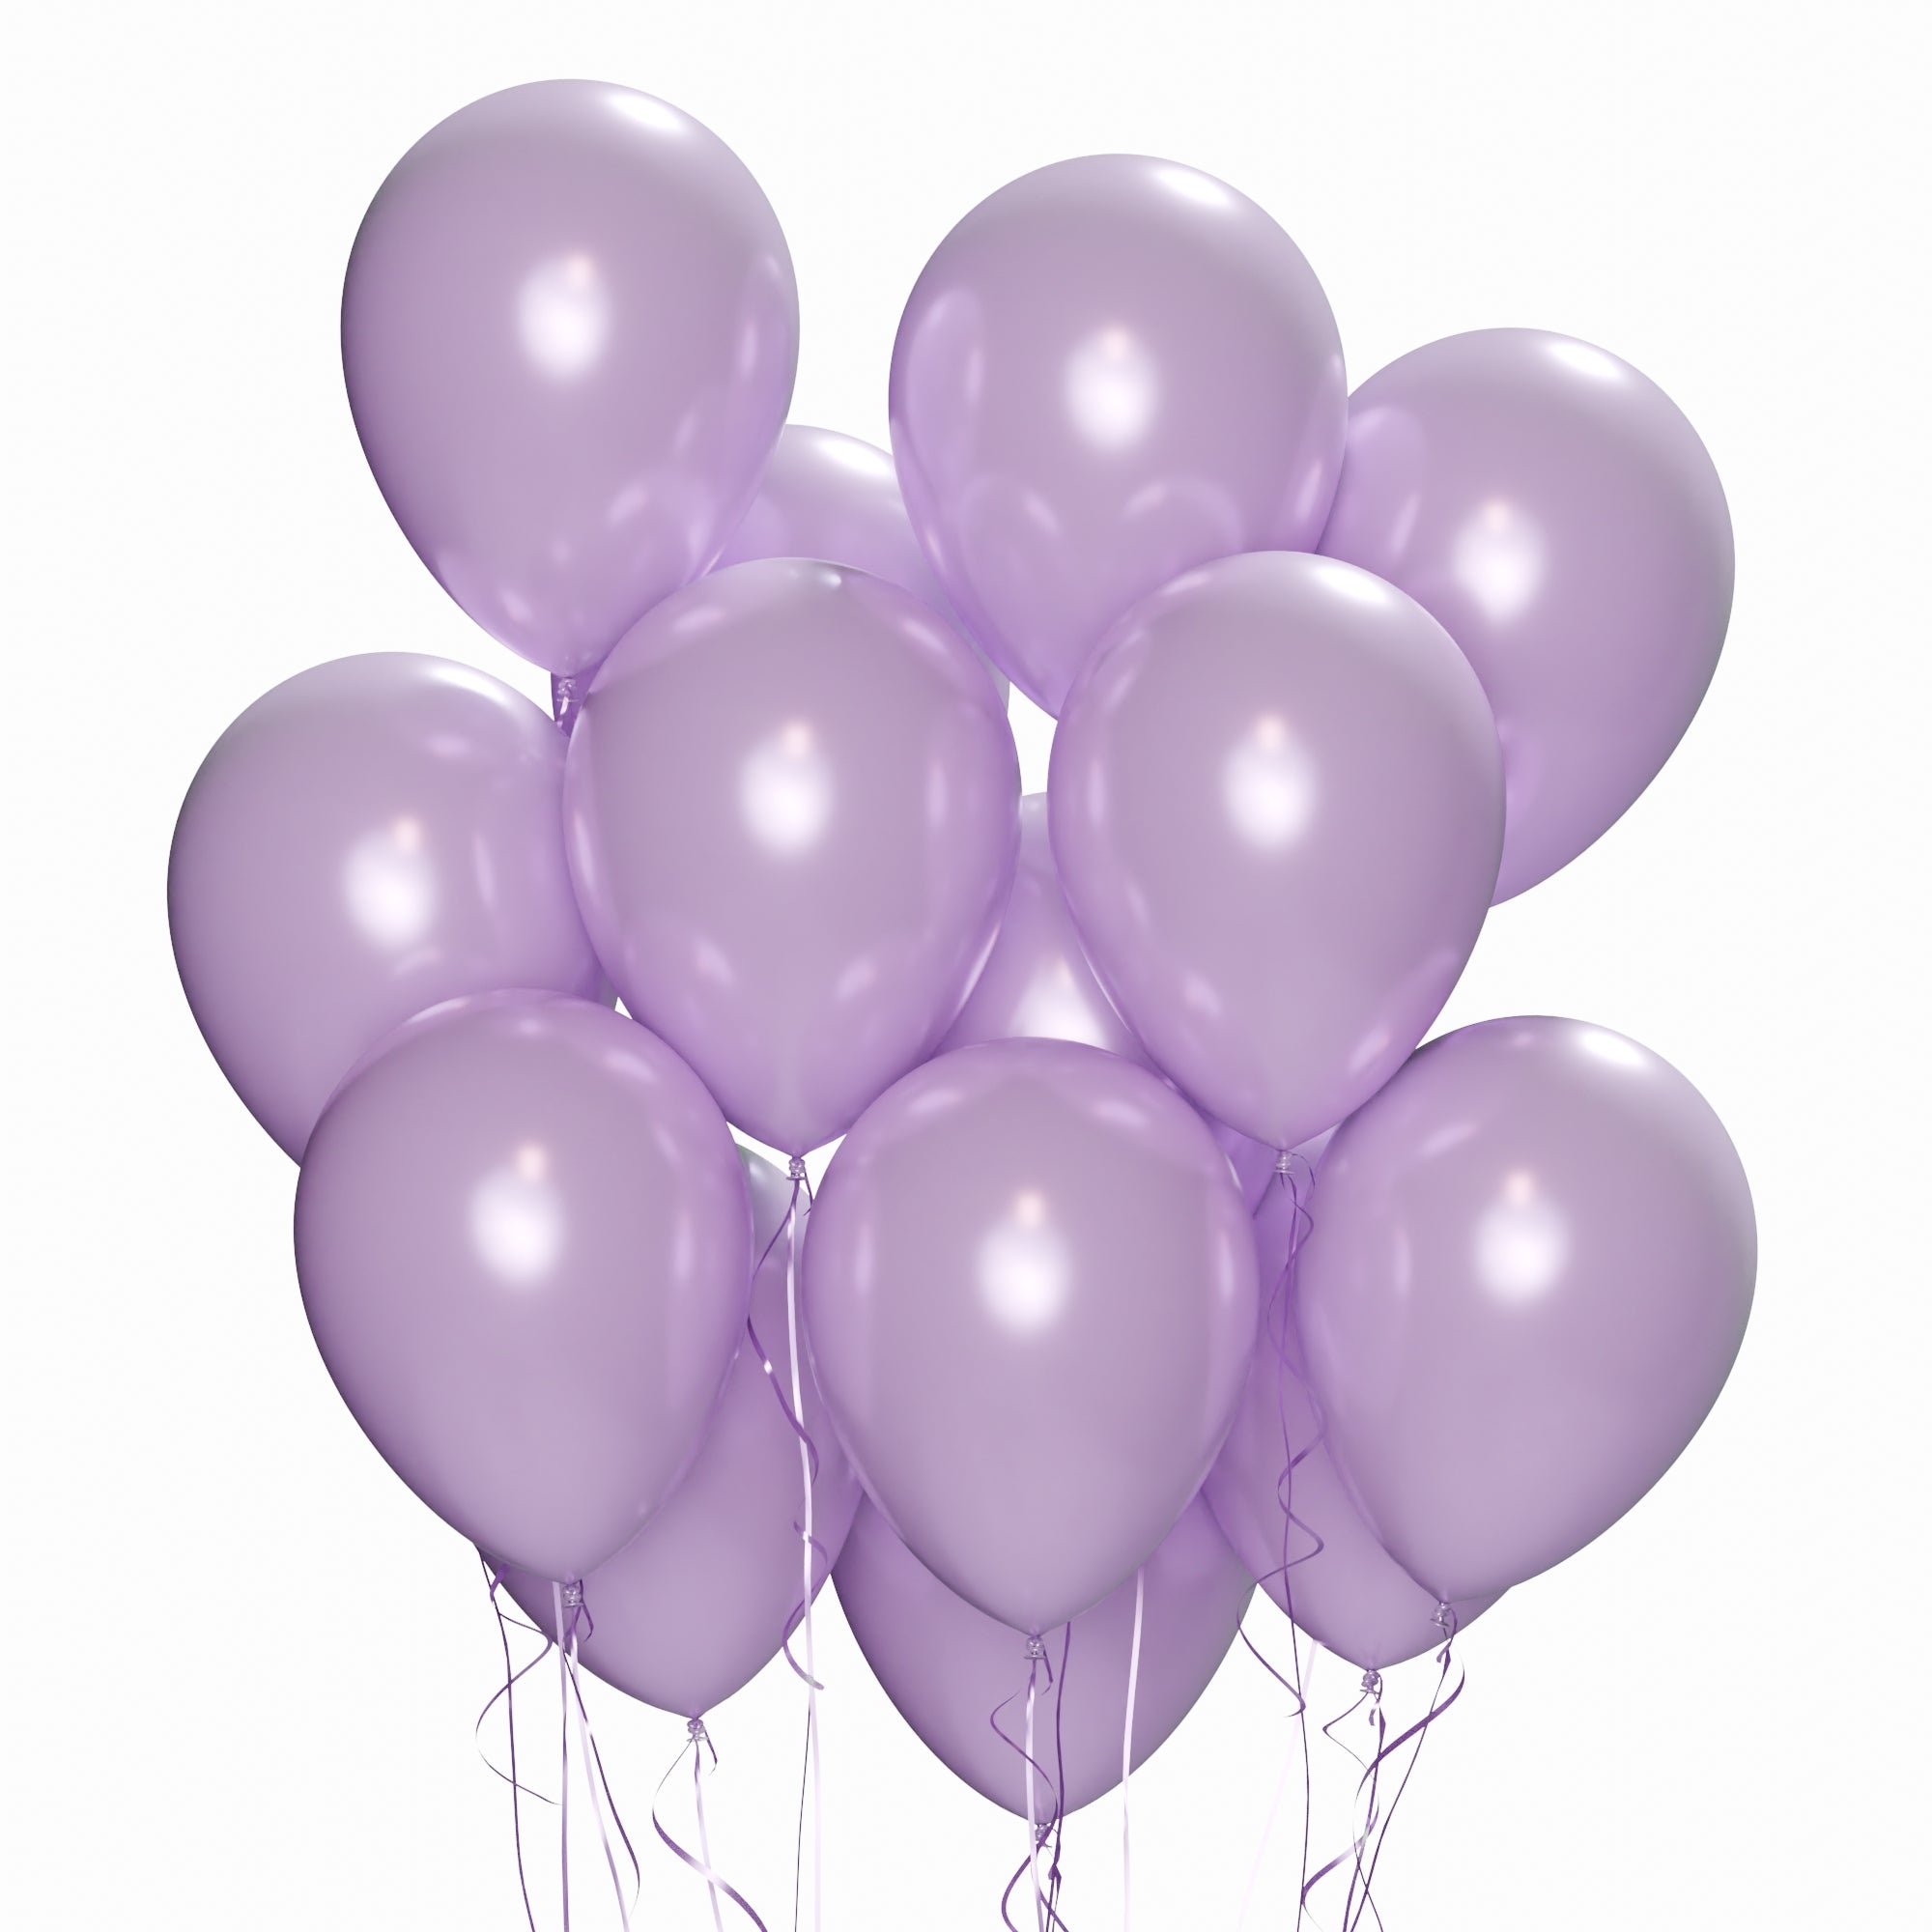 Metallic Chrome Pearl Balloons by Party Over Here – PARTY OVER HERE